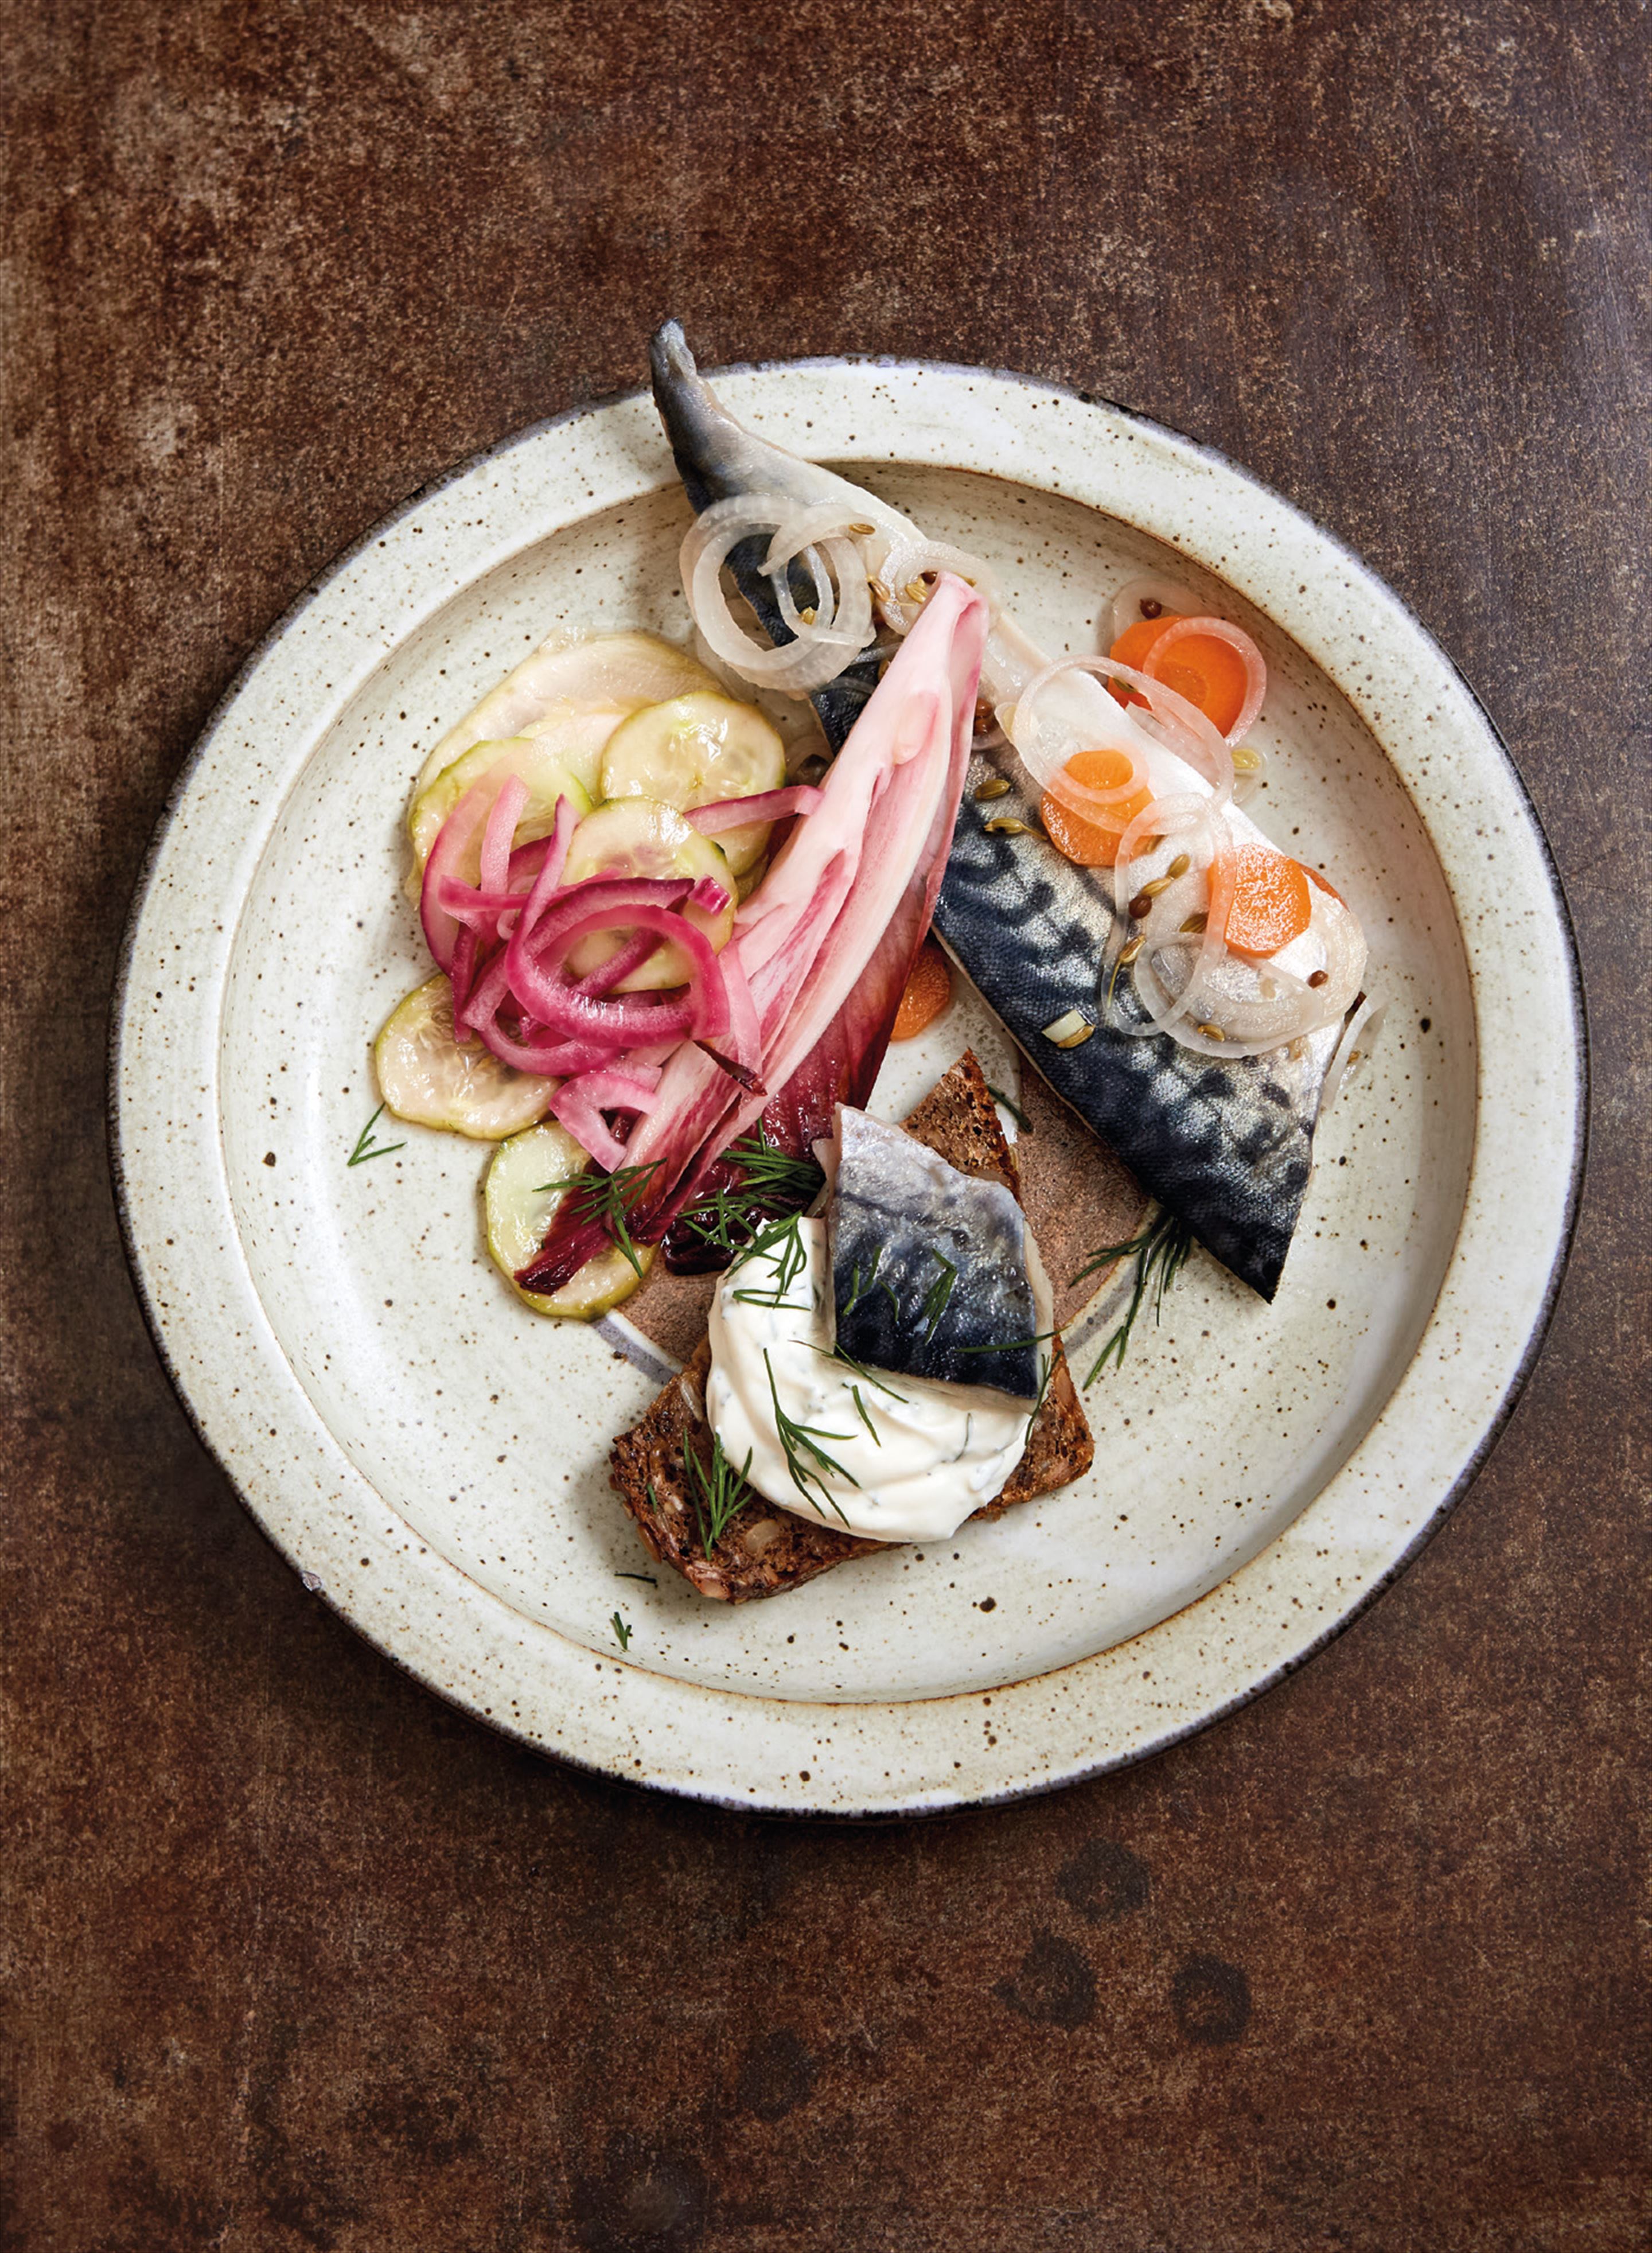 Quick soused mackerel with bread-and-butter pickles